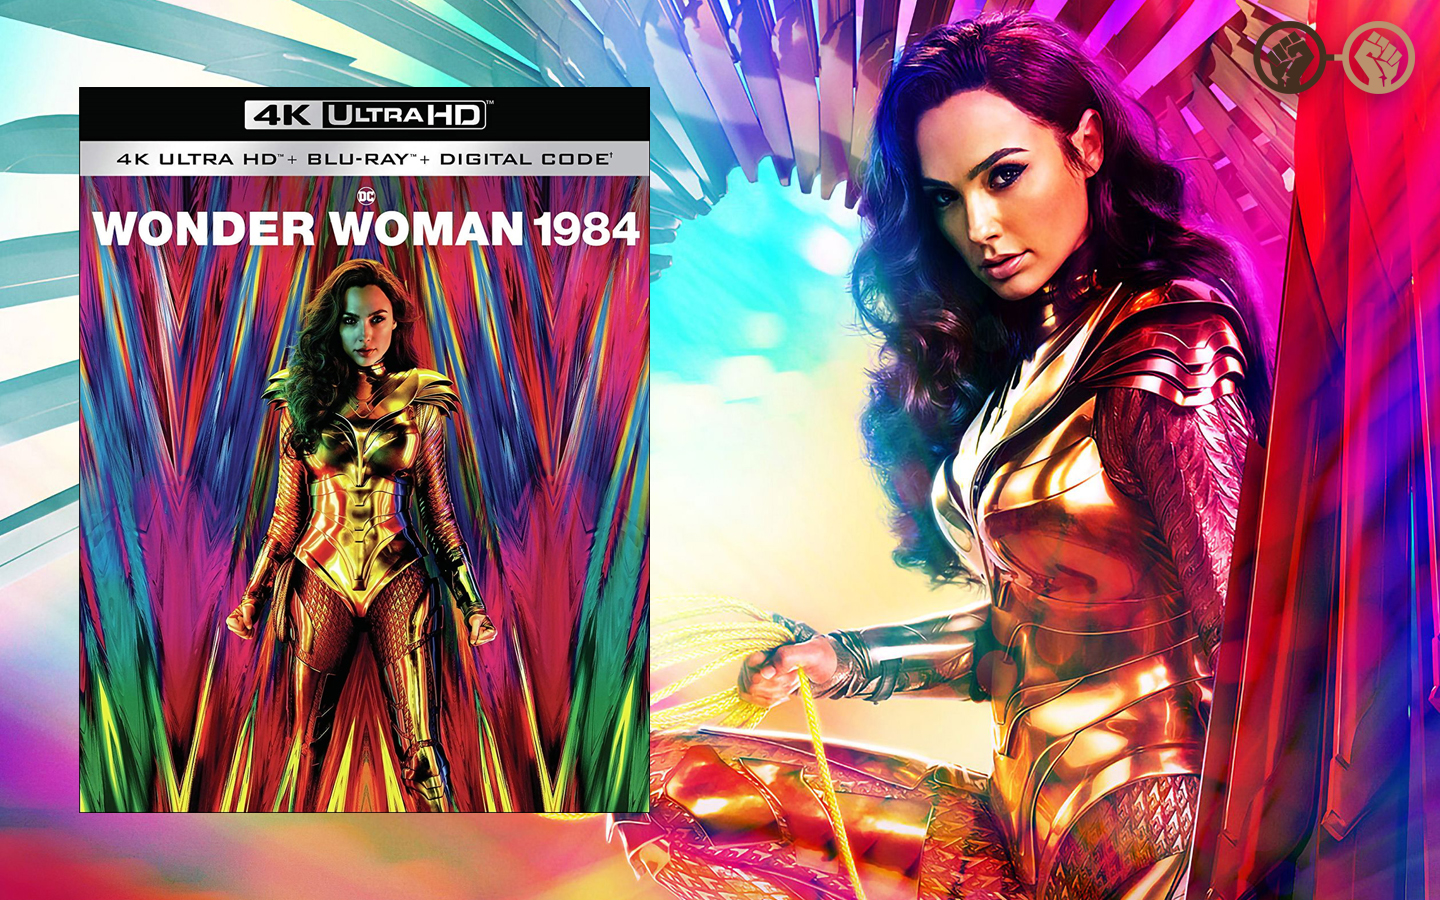 ‘Wonder Woman 1984’ On 4K Ultra HD And Blu-ray Is Packed With Exciting Bonus Features